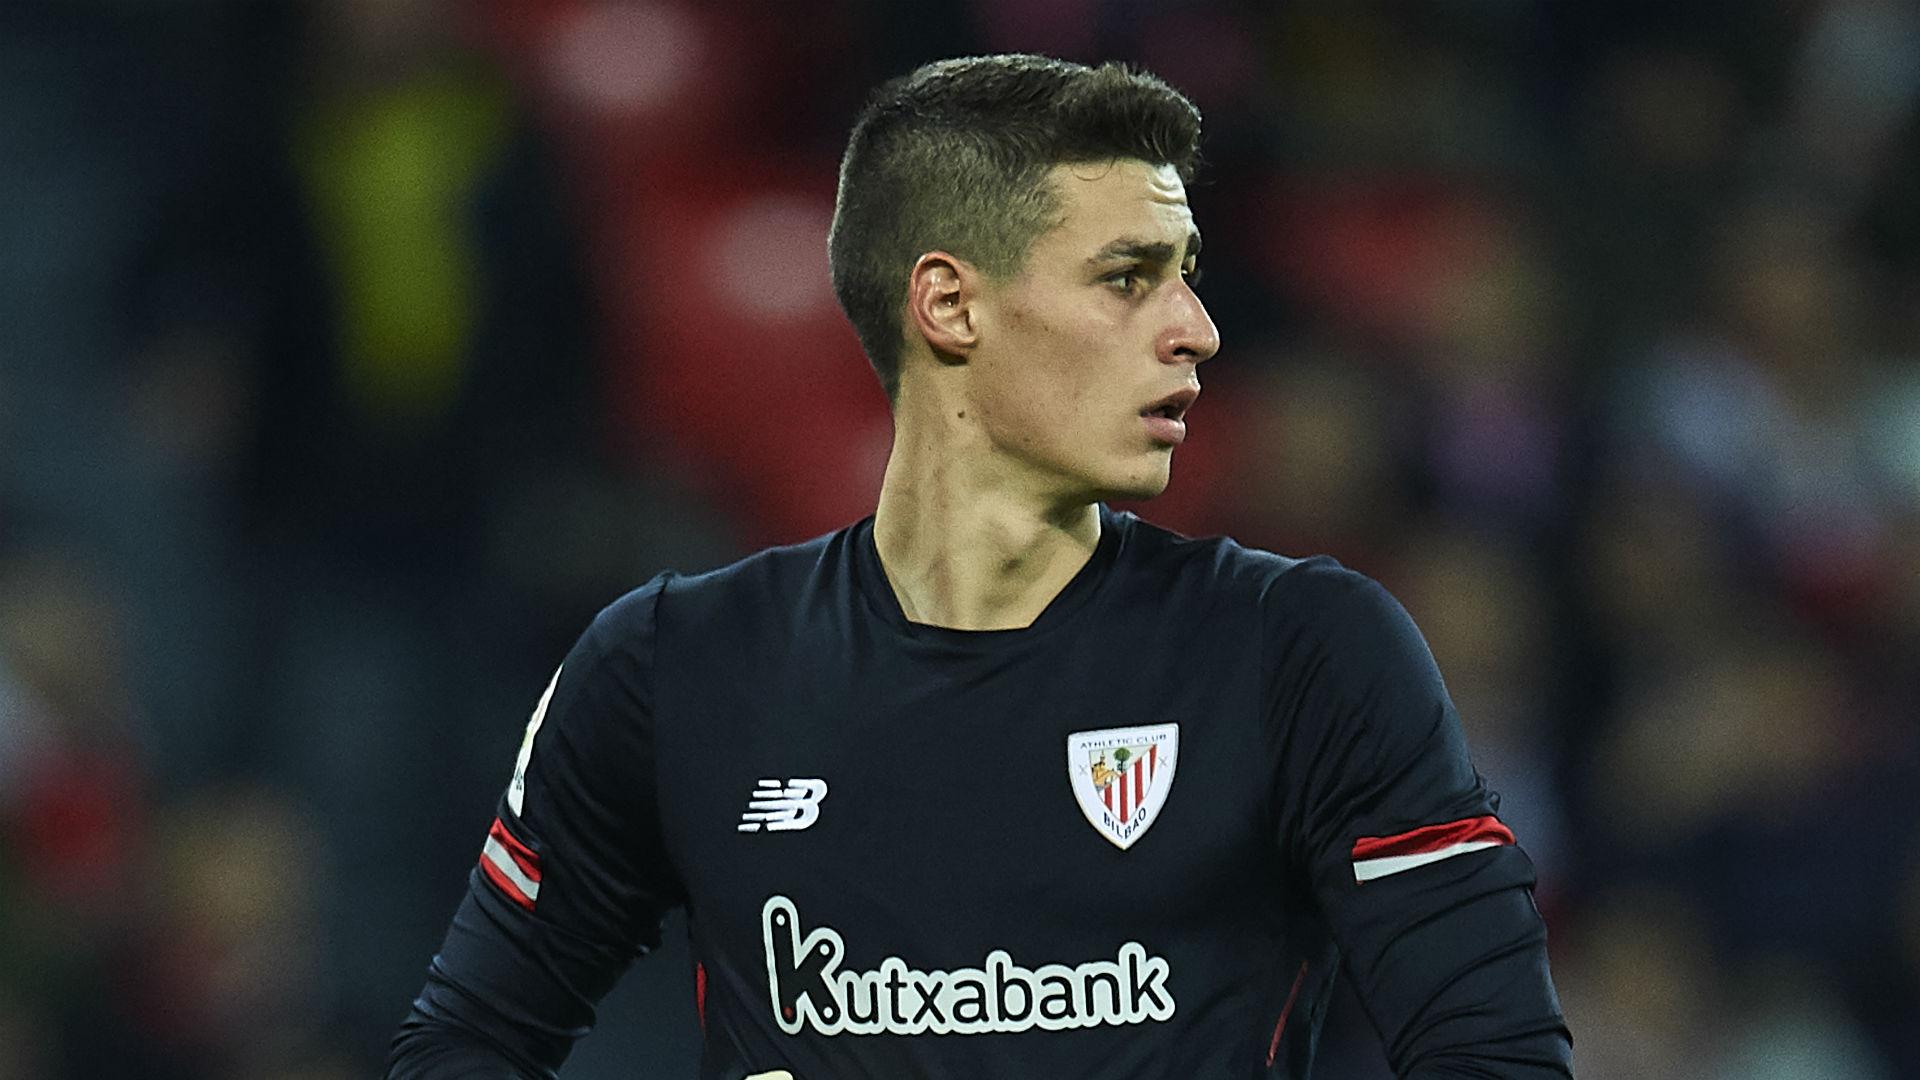 Kepa Arrizabalaga closes in on Chelsea move after record $93M